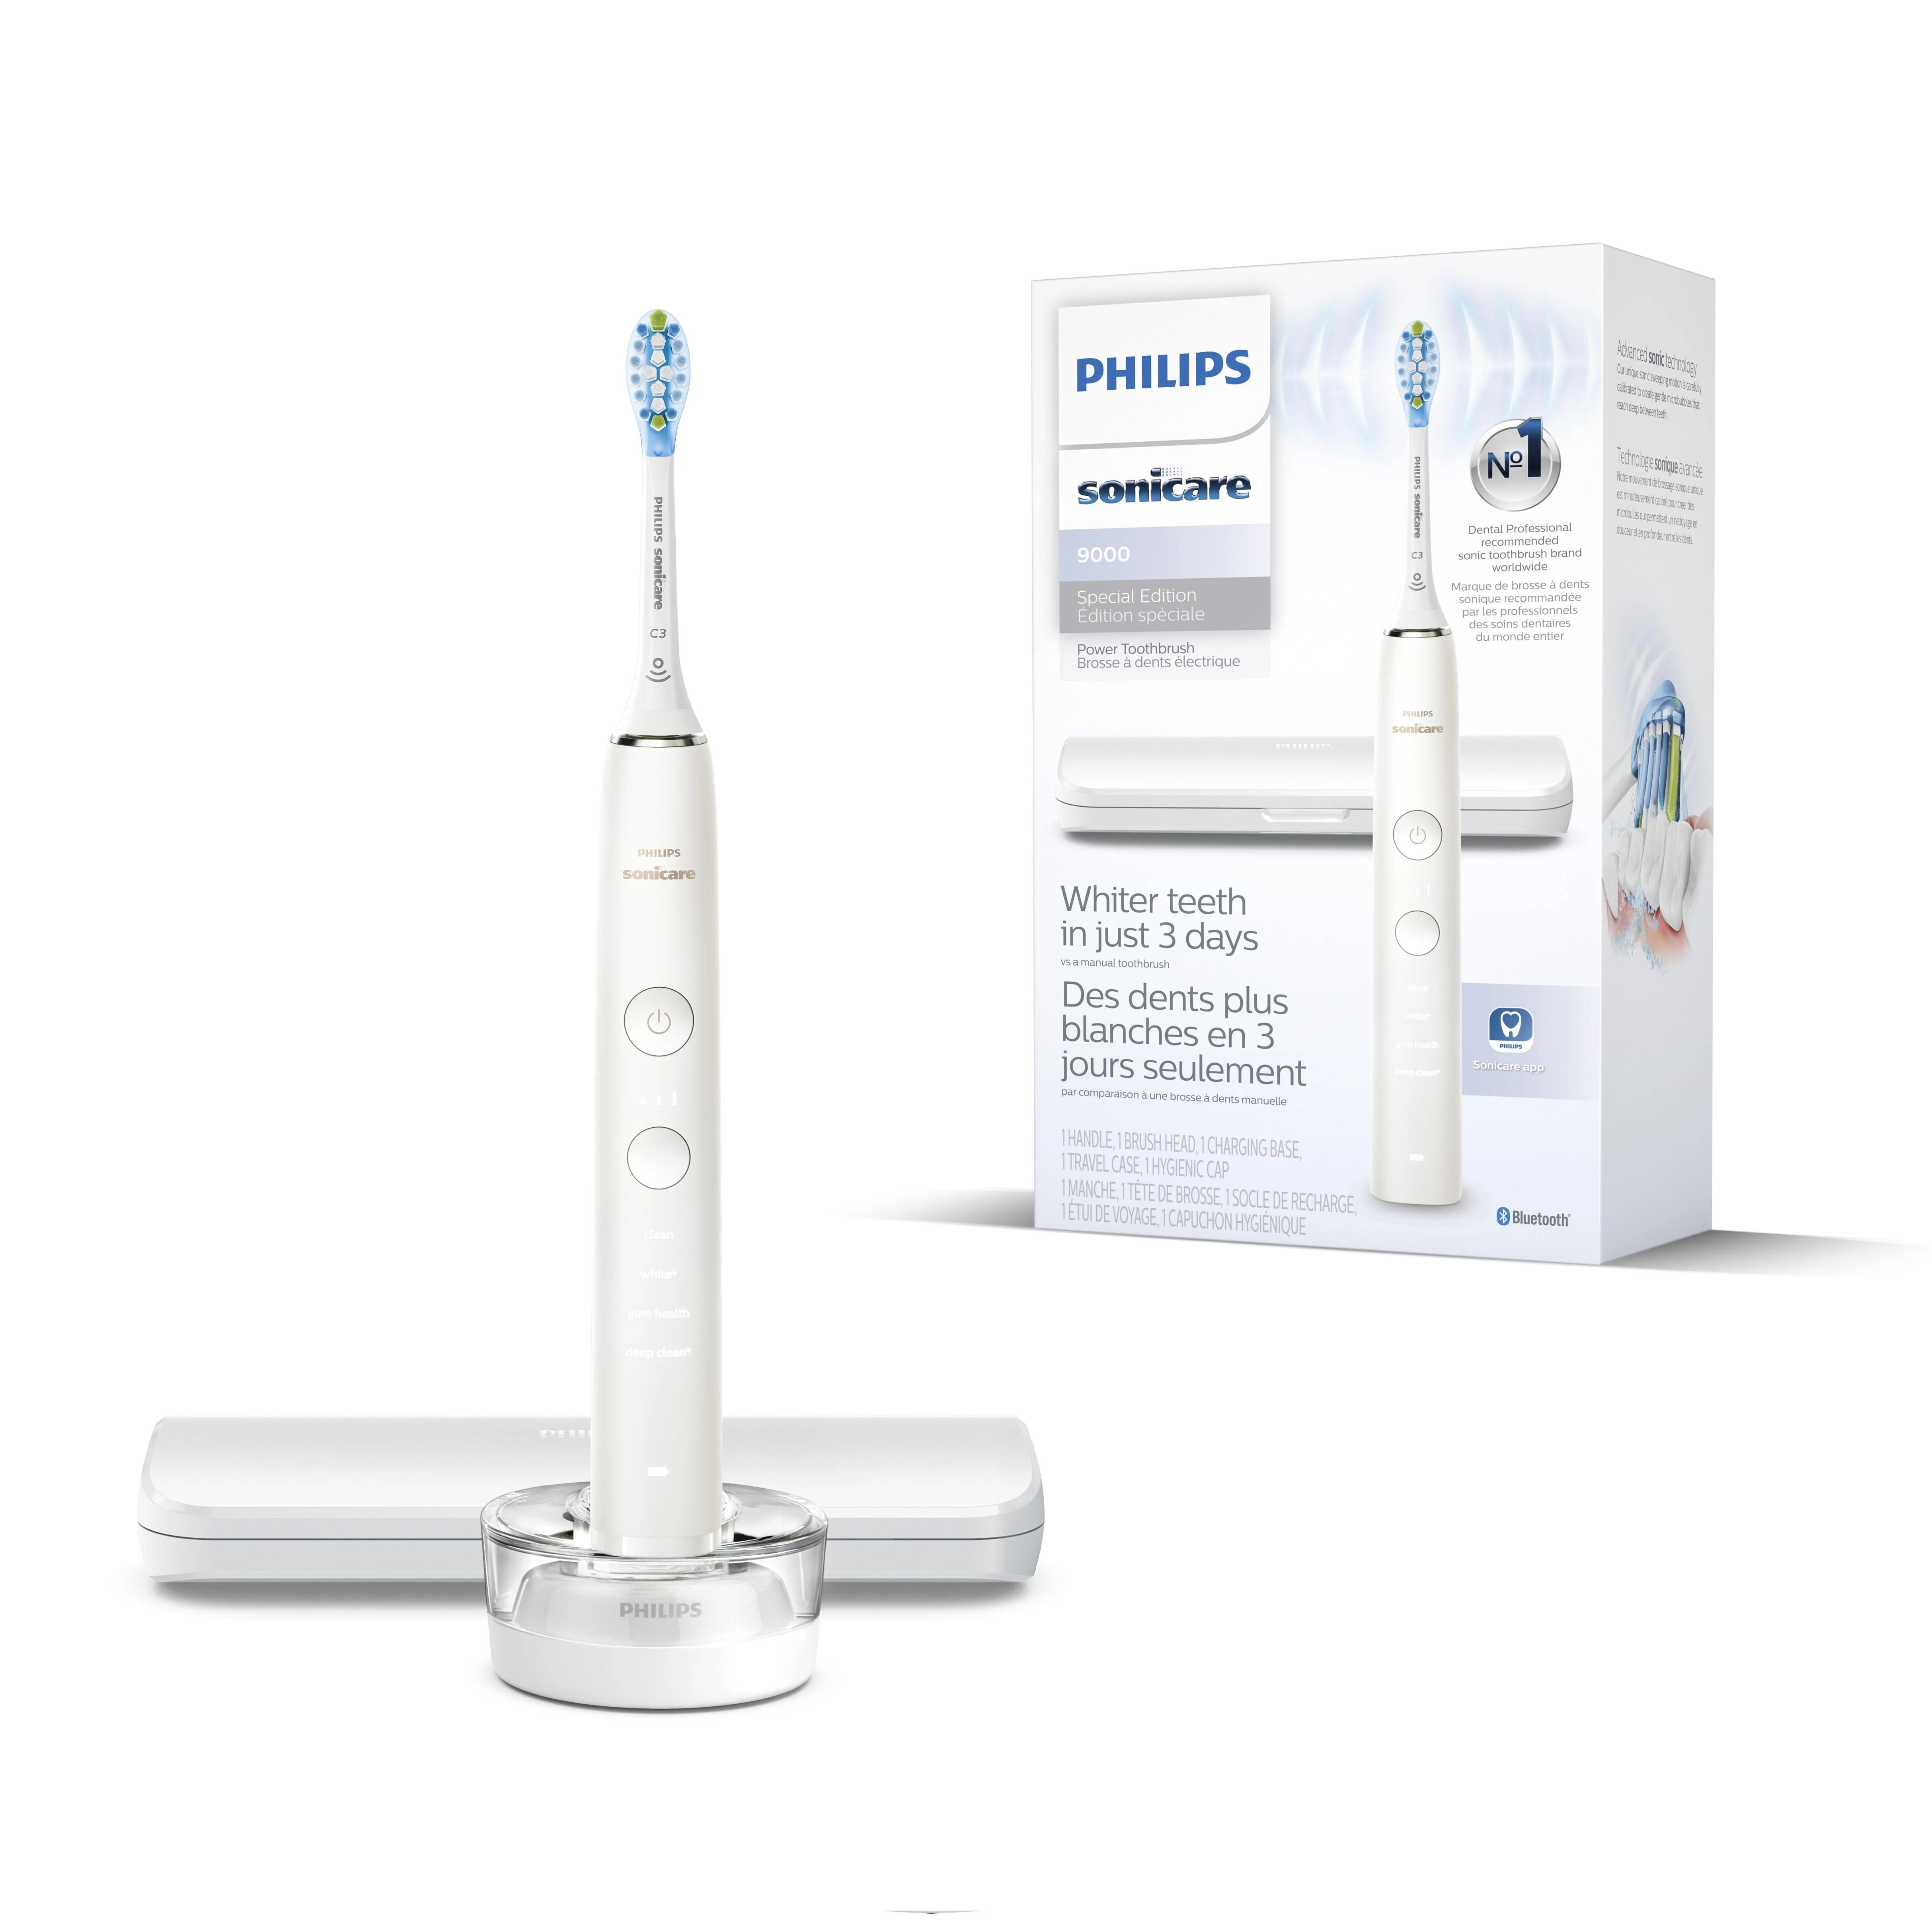 Philips Sonicare DiamondClean 9000 Special Edition Adult Rechargeable Toothbrush, White HX9911/93 | Walmart (US)